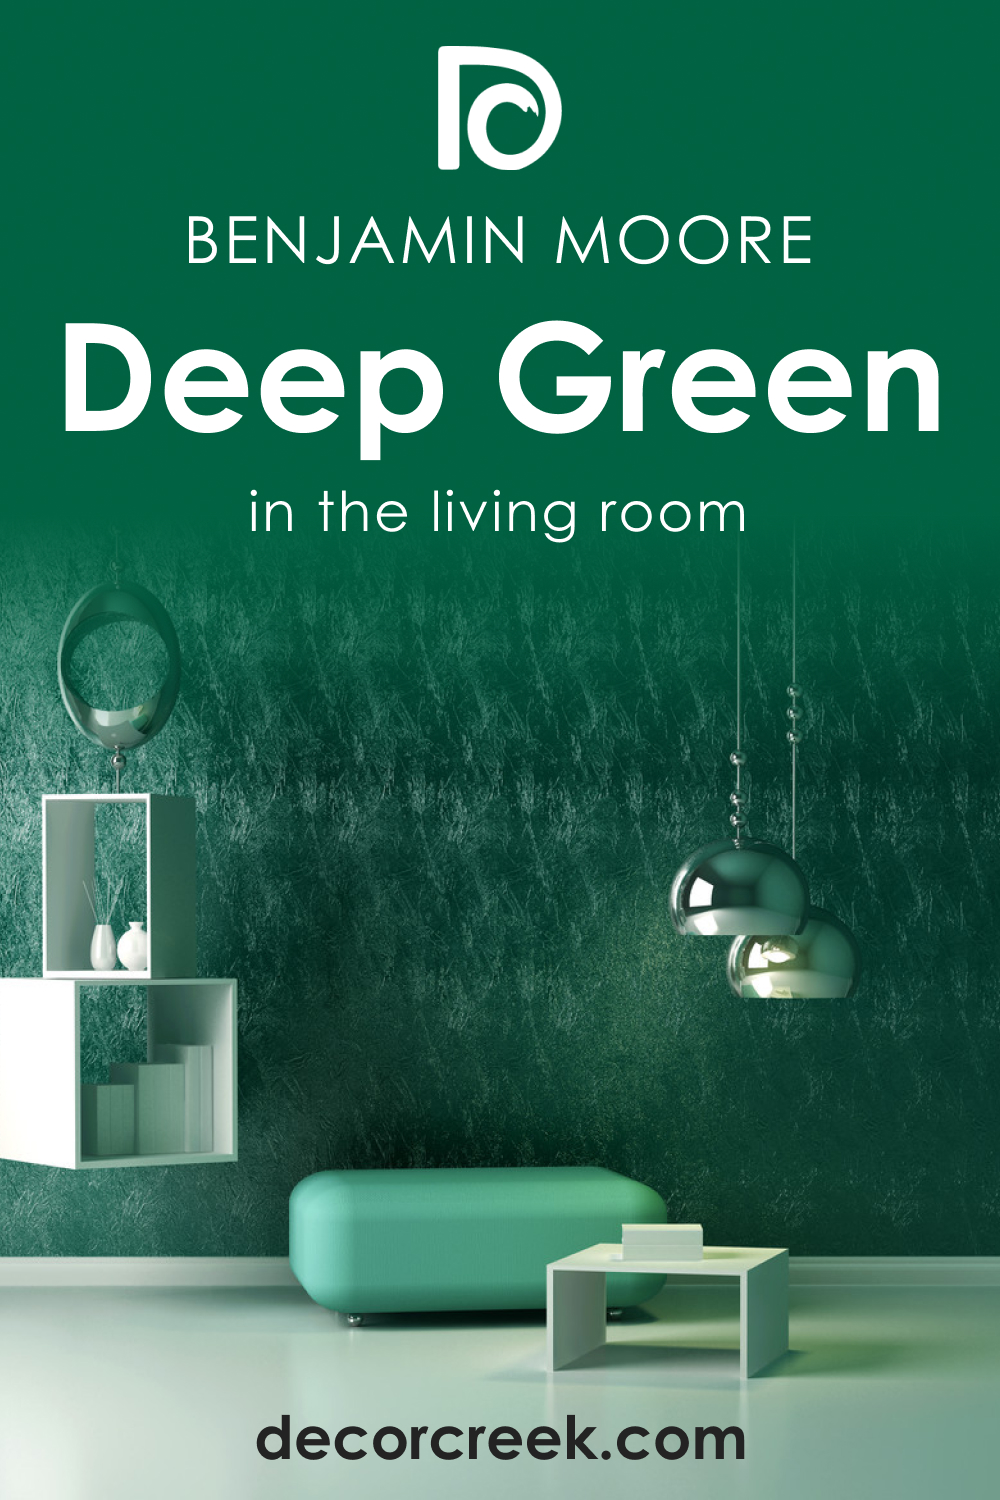 How to Use Deep Green 2039-10 in the Living Room?